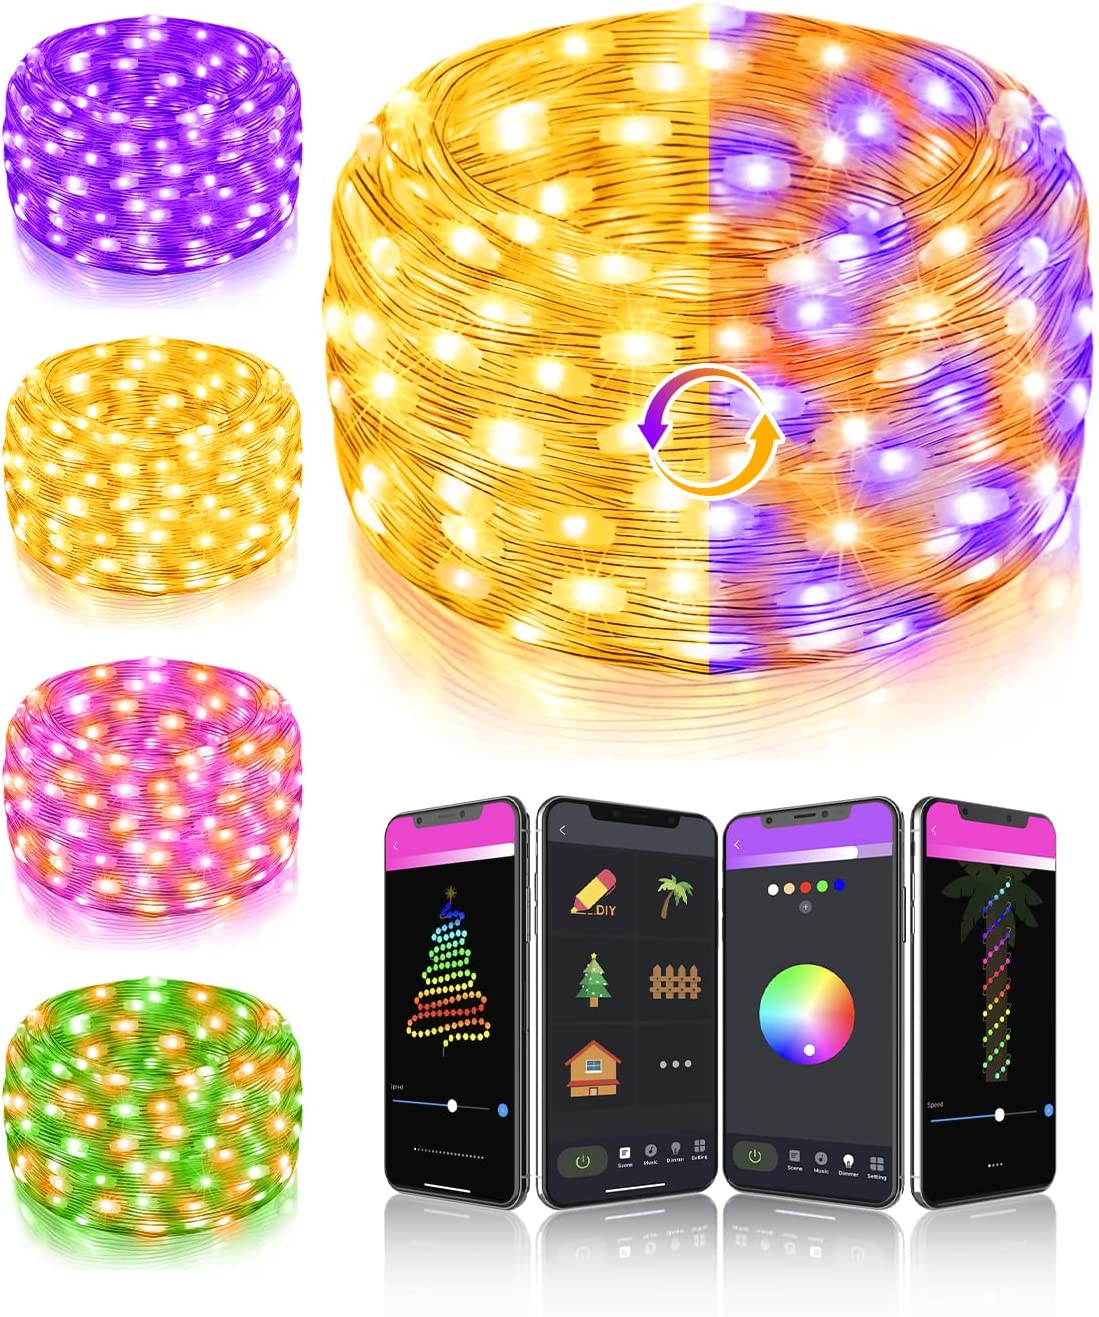 Rope String Lights Custom Modes – 16Ft Bluetooth App Control Christmas Lights RGB Color Changing Dimmble Twinkle Light Music Sync for Bedroom Wedding Patio Garden Holiday Tree Decor, NO Remote